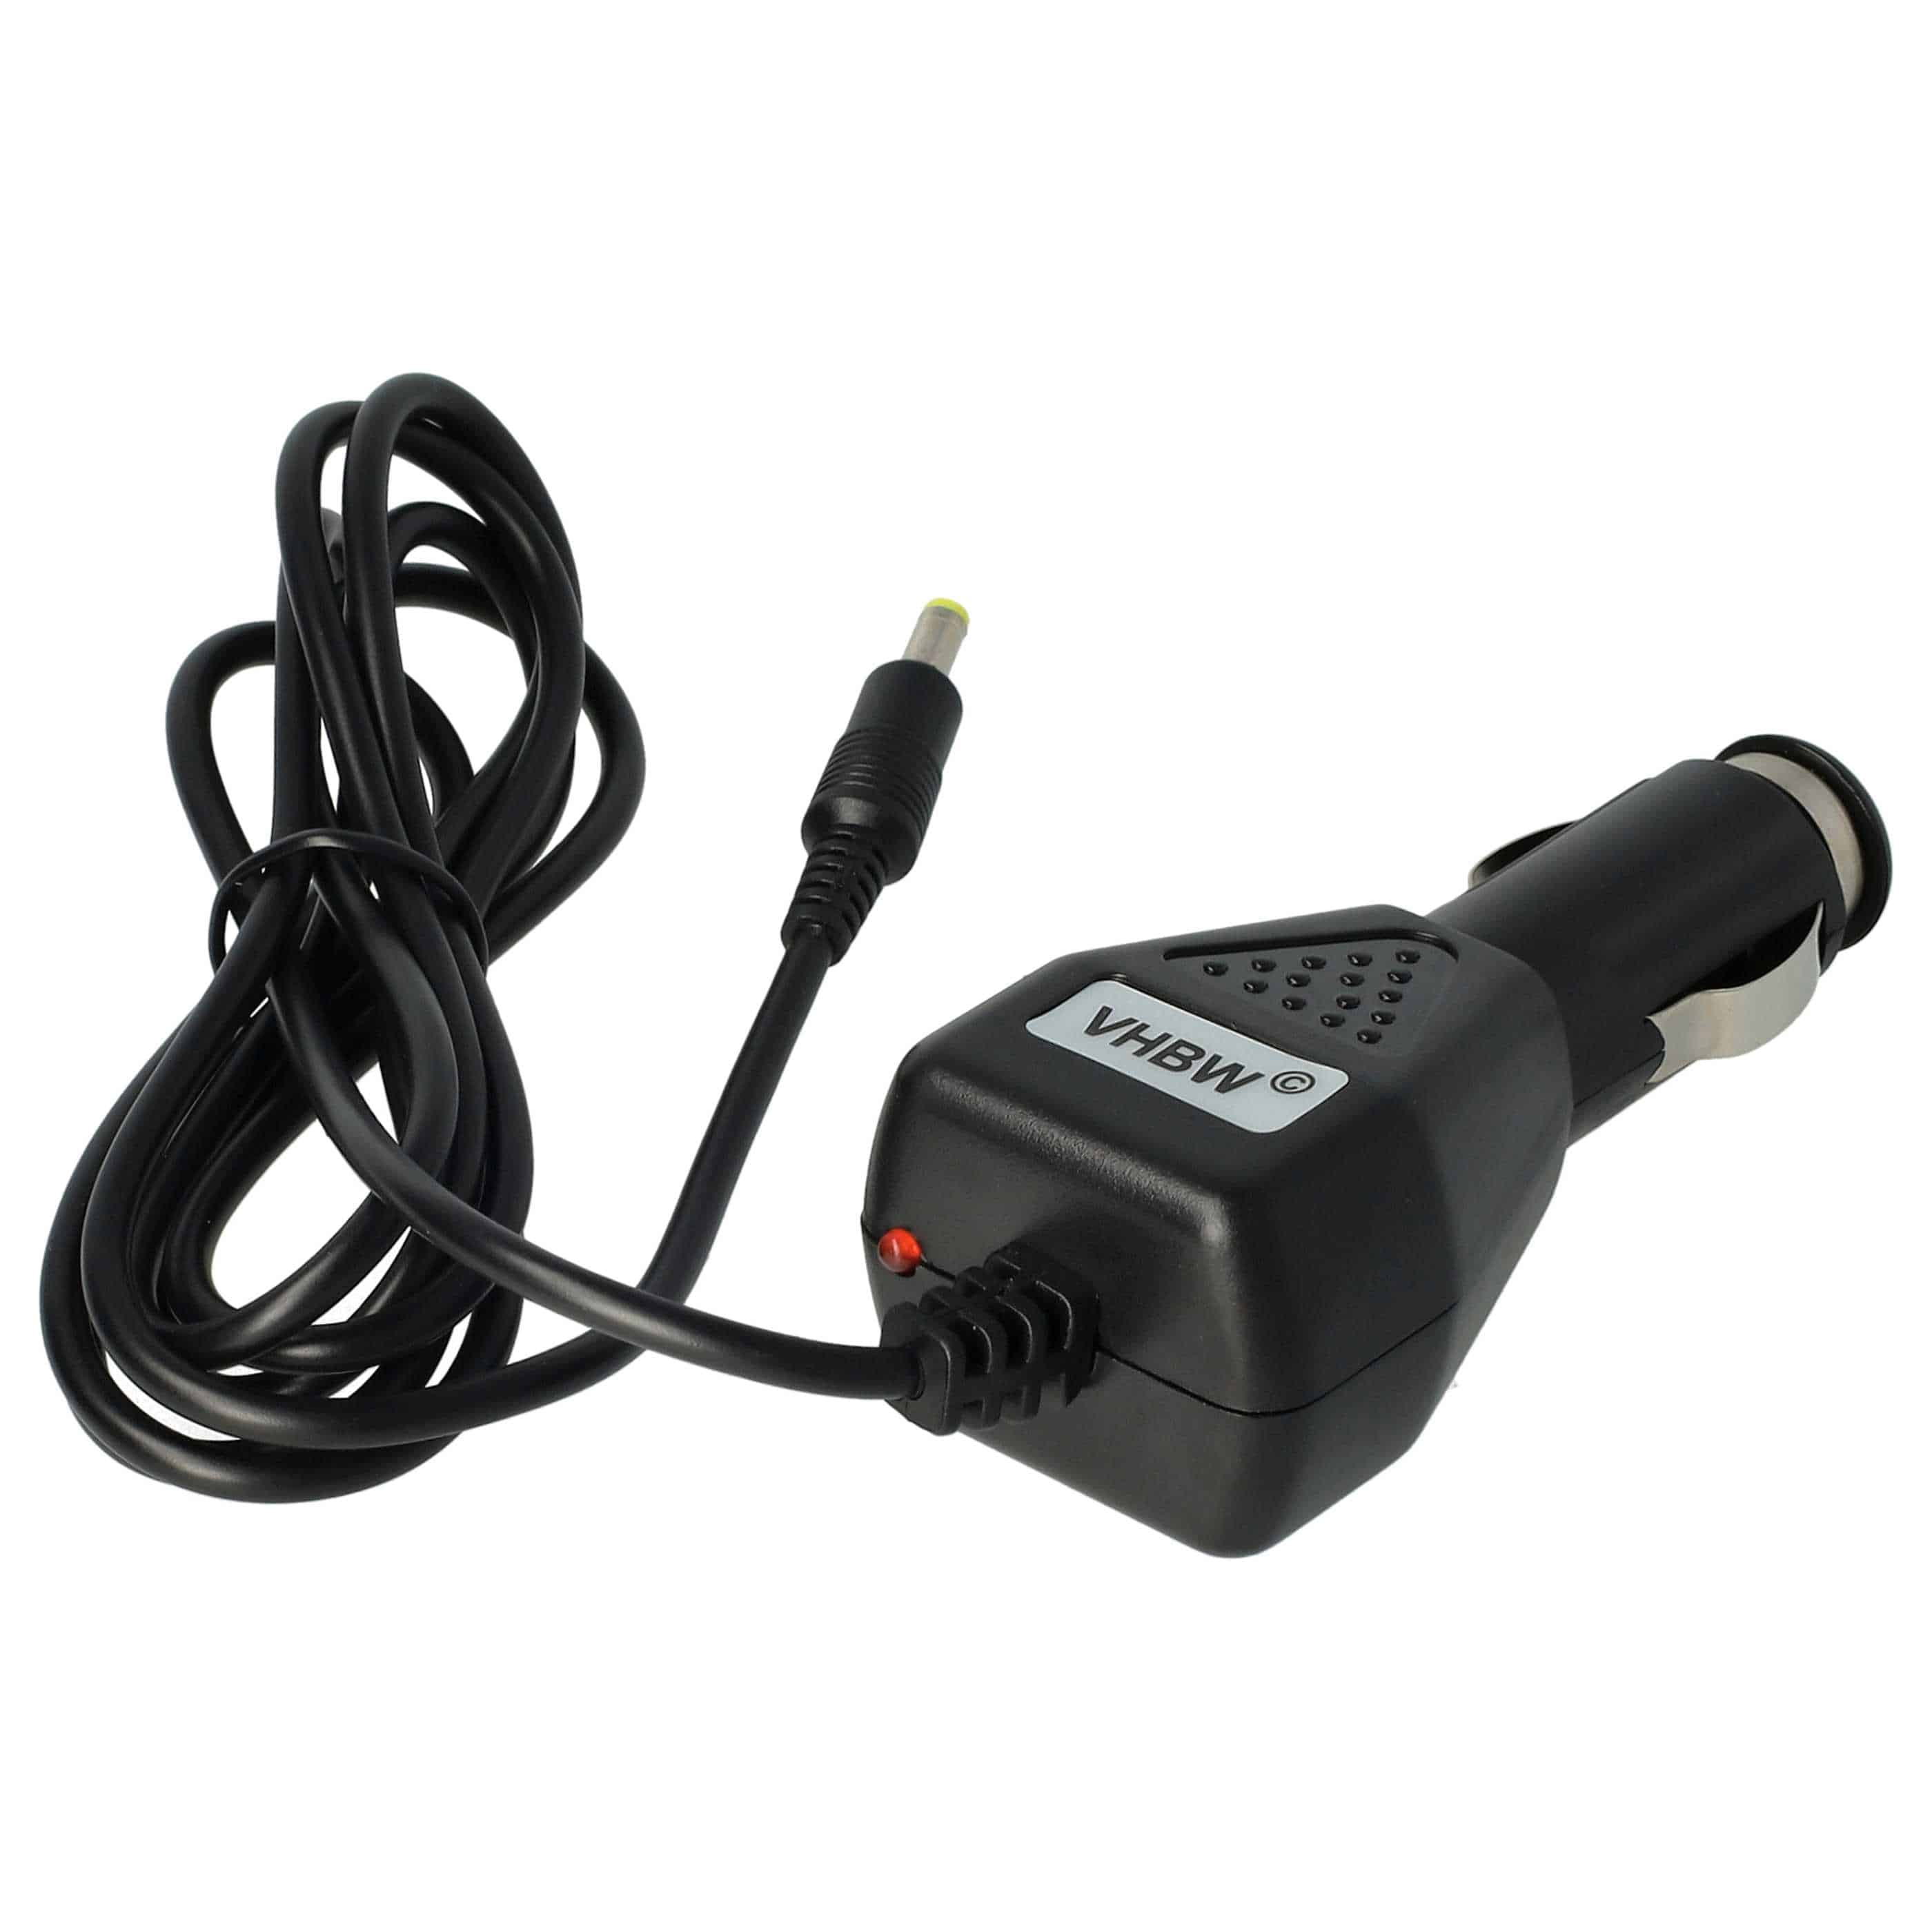 Cable coche reemplaza Philips 314011833821 para reproductor DVD Philips - Cargador 12 V